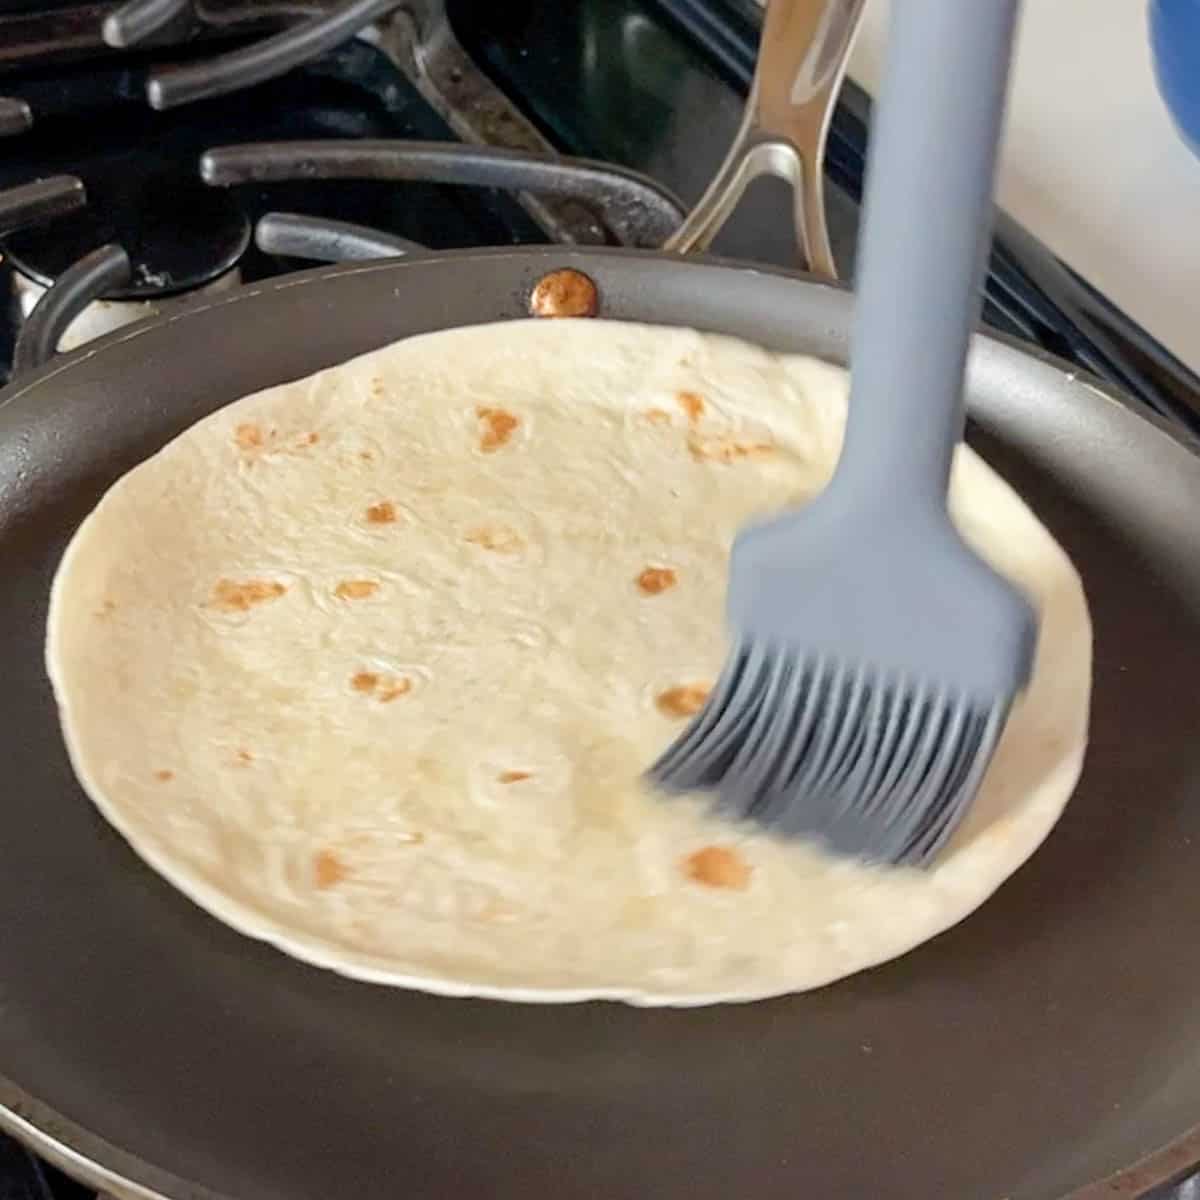 bushing tortilla with oil